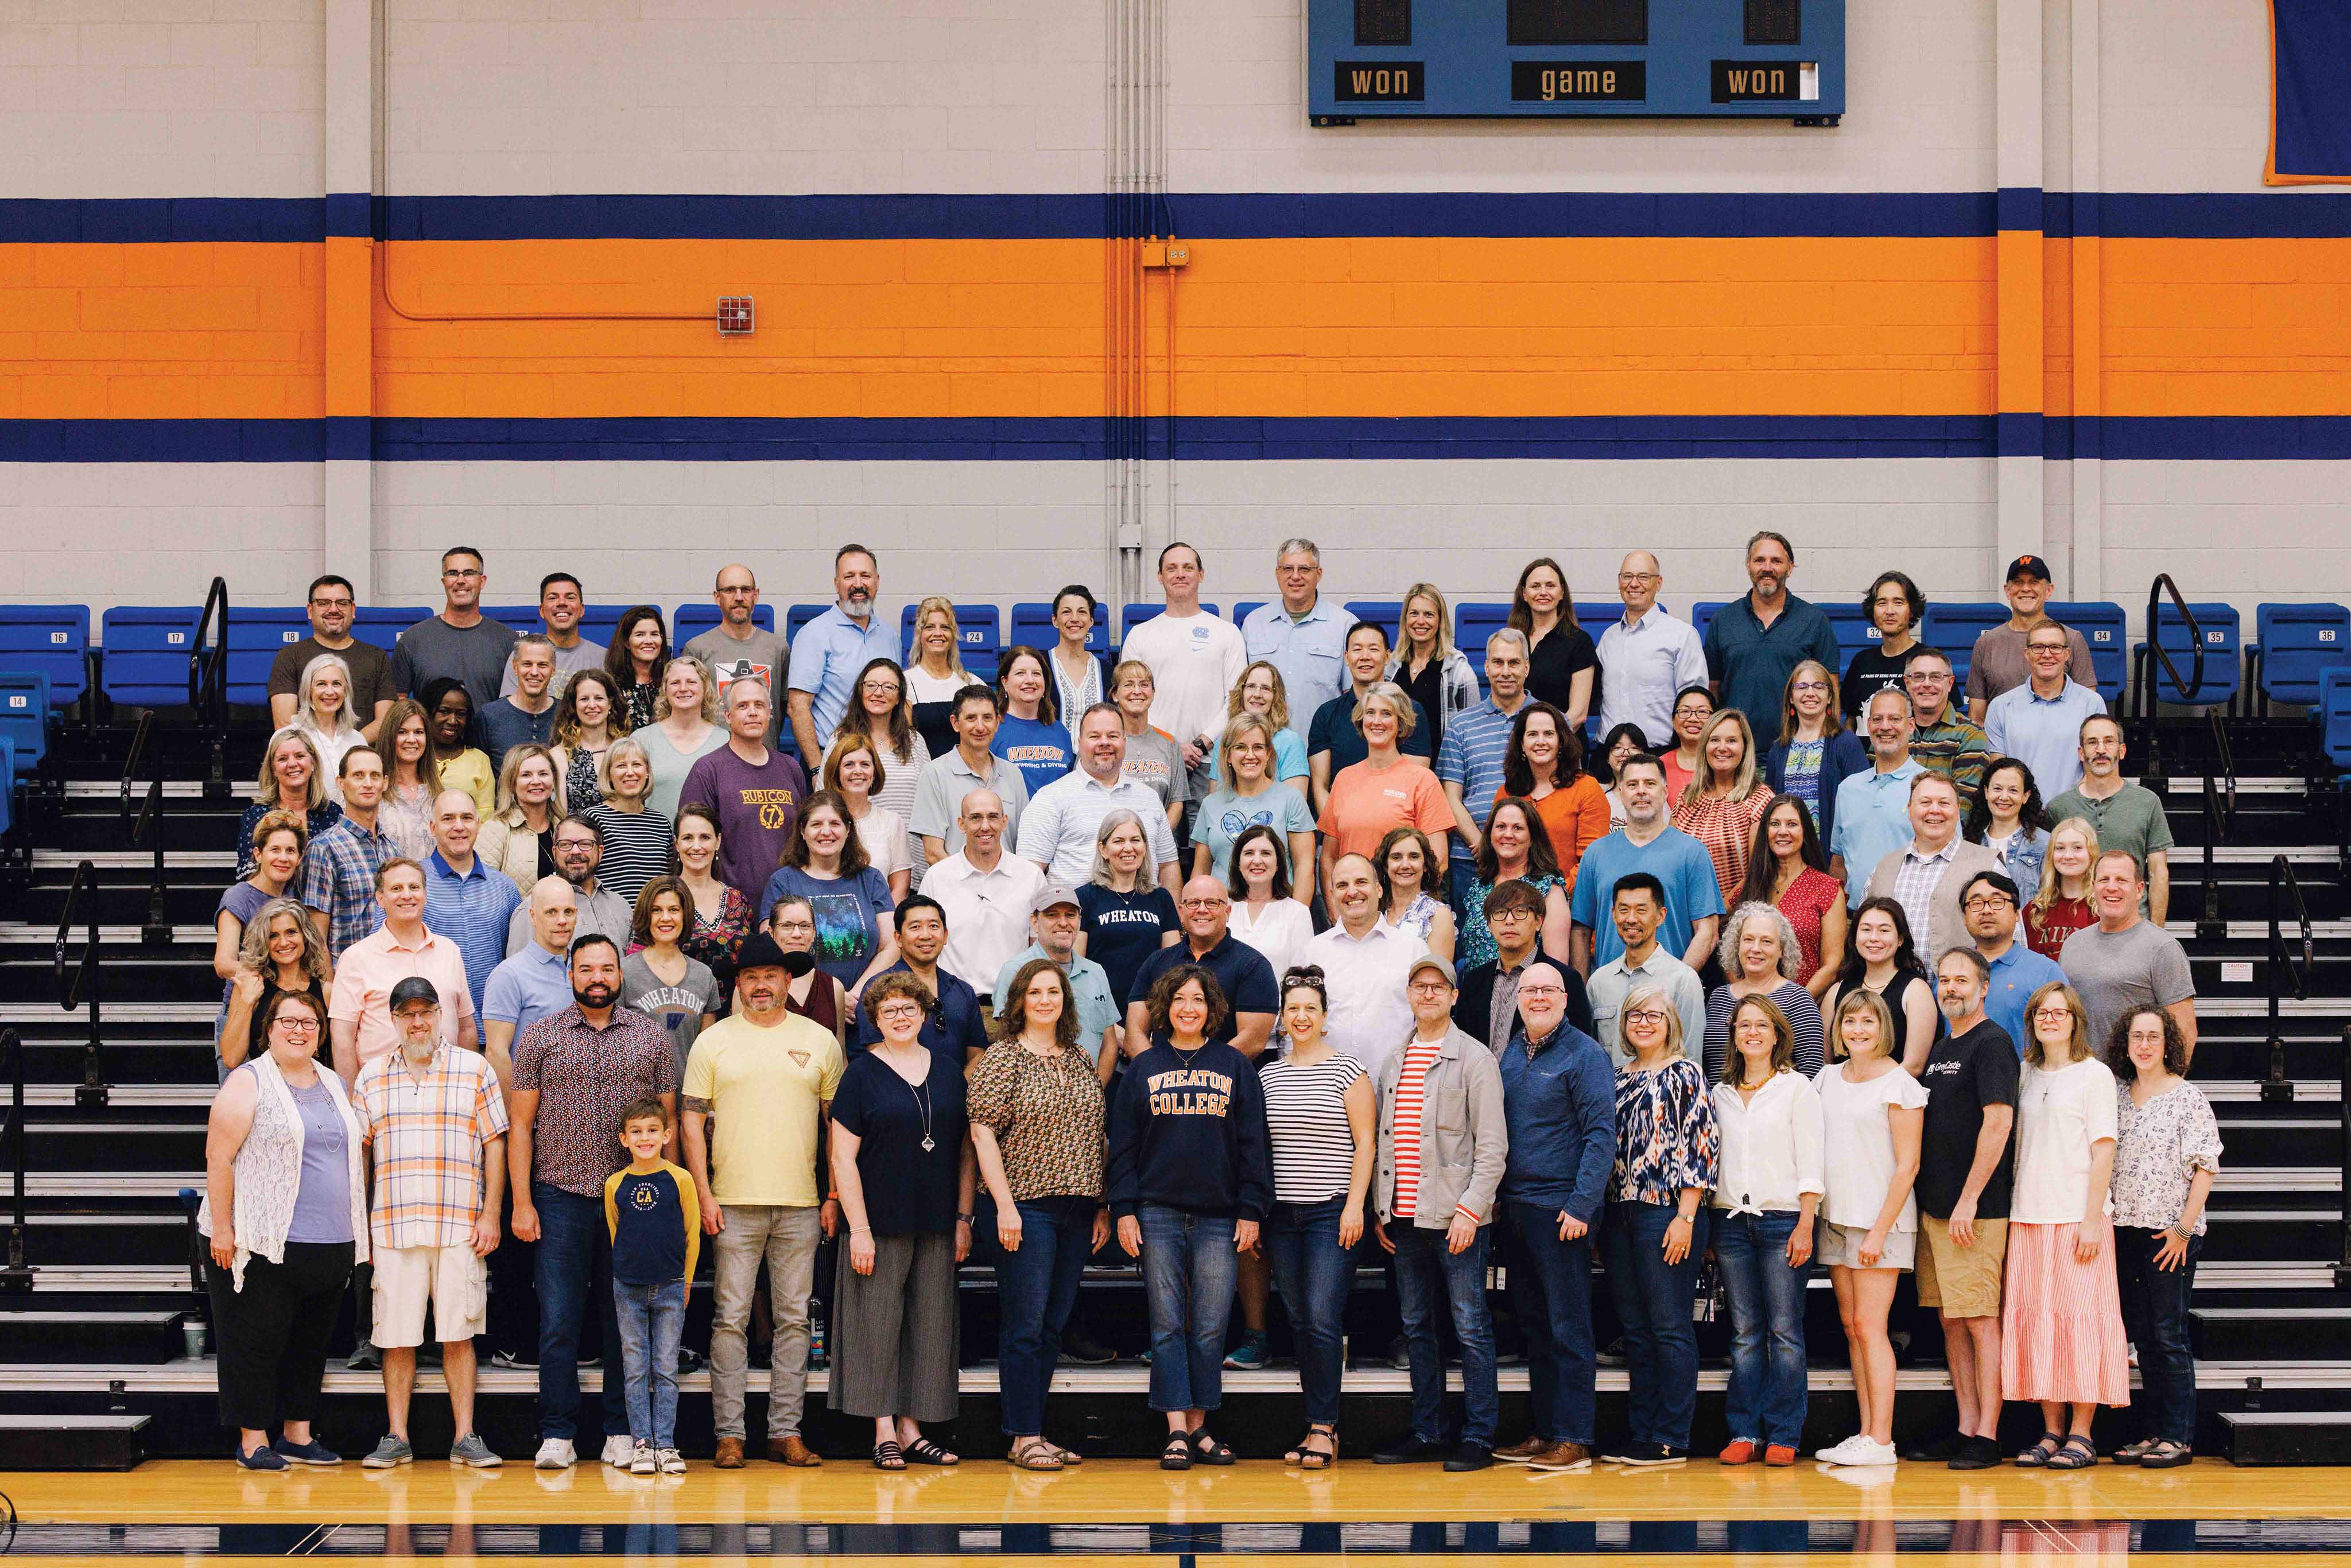 Group photo of 1993 graduates who attended Wheaton College Homecoming 2023